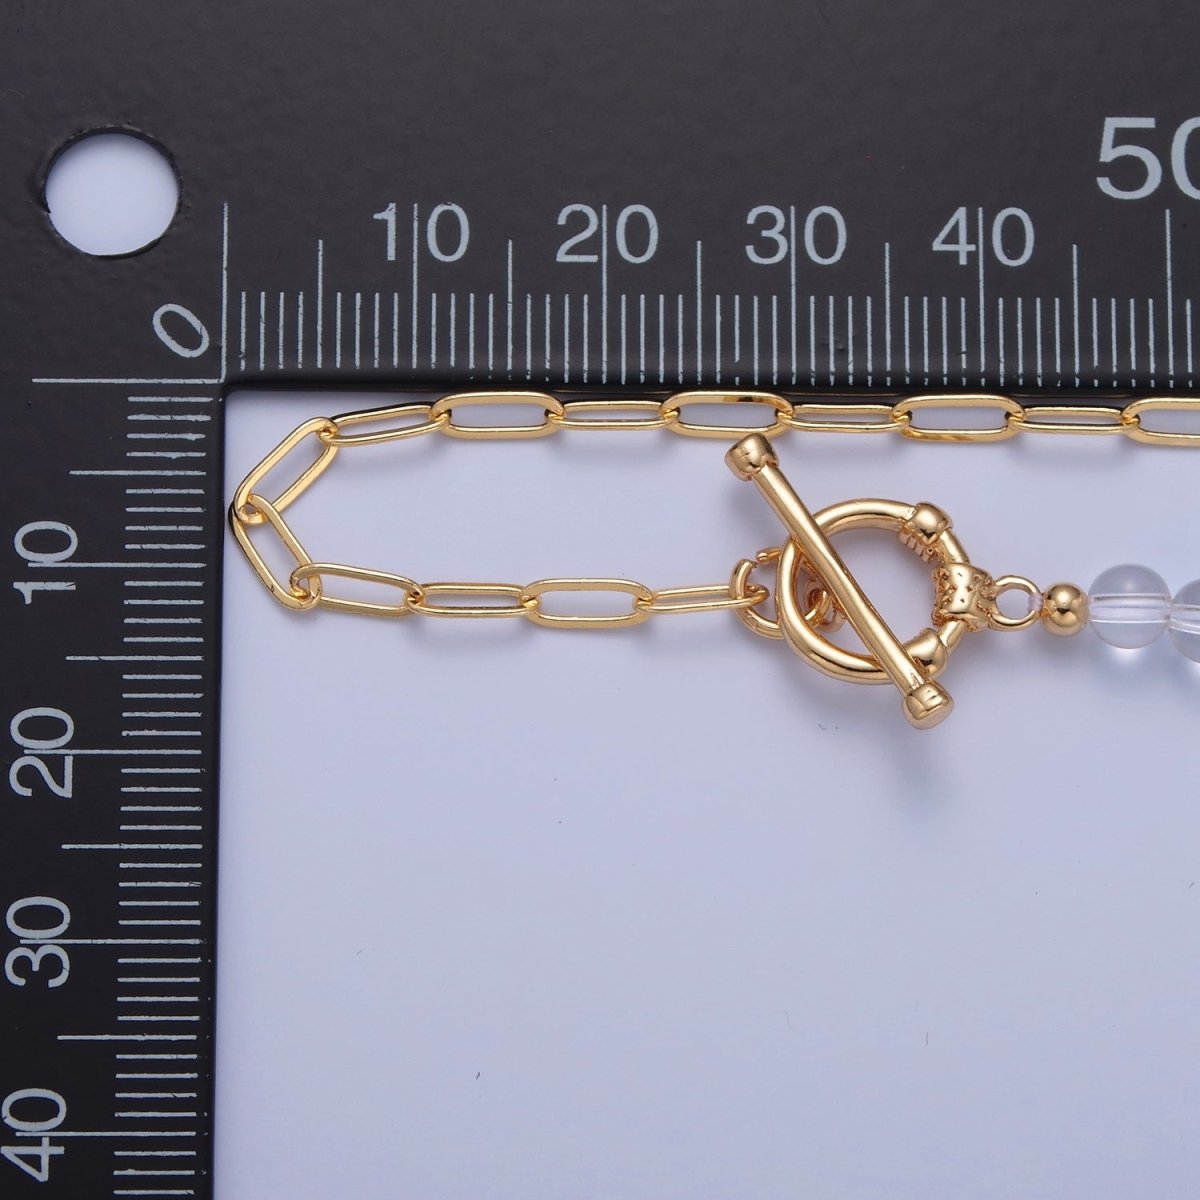 Dainty Half Bead Half Link Chain Necklace, 24k Gold Filled Paperclip Chain with Clear Quartz Necklace Toggle Clasp | WA-965 Clearance Pricing - DLUXCA